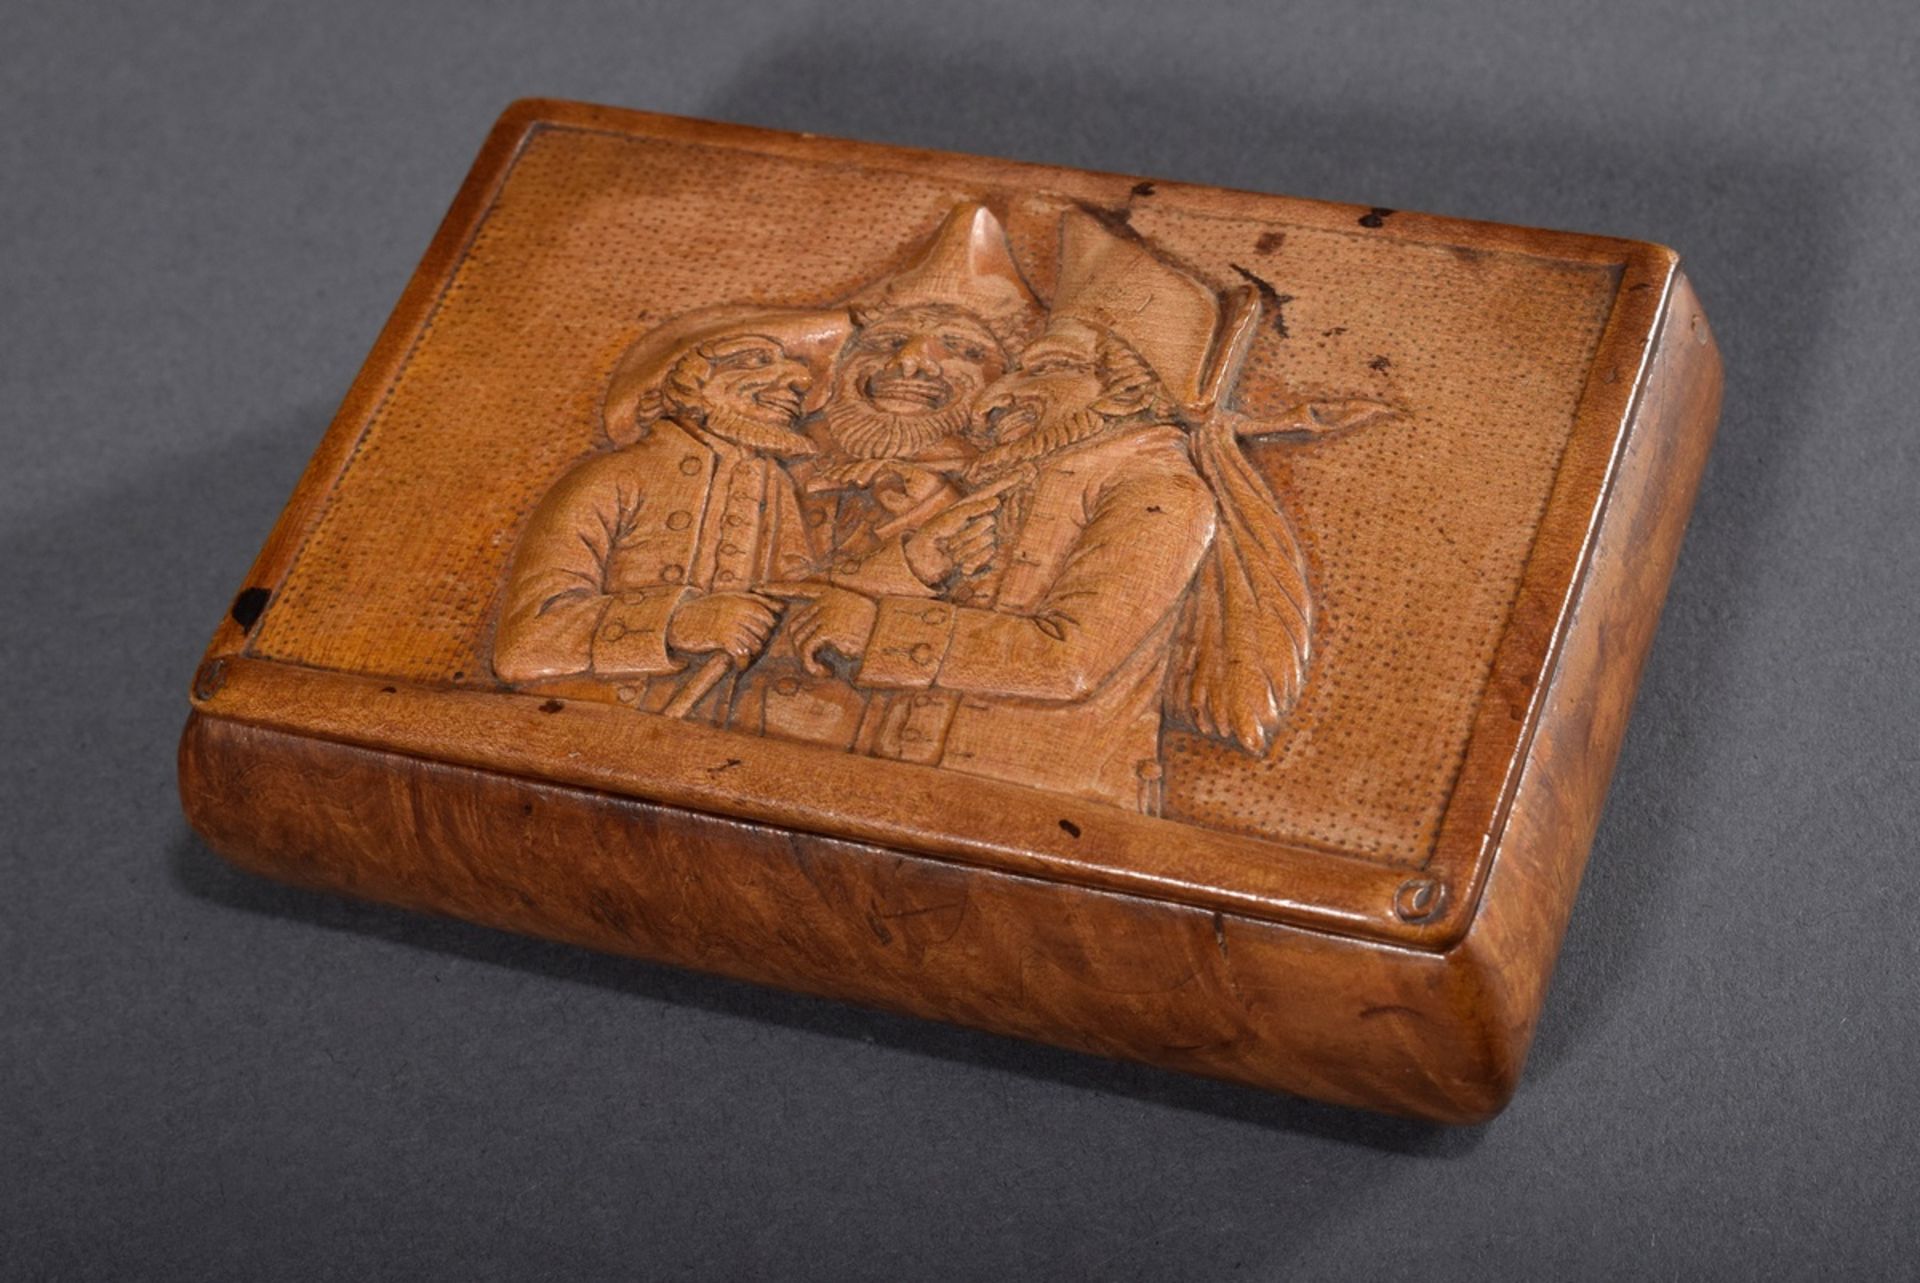 Wurzelholz Schnupftabakdose mit geschnitztem Rel | Burl wood snuff box with carved relief in the li - Image 2 of 8